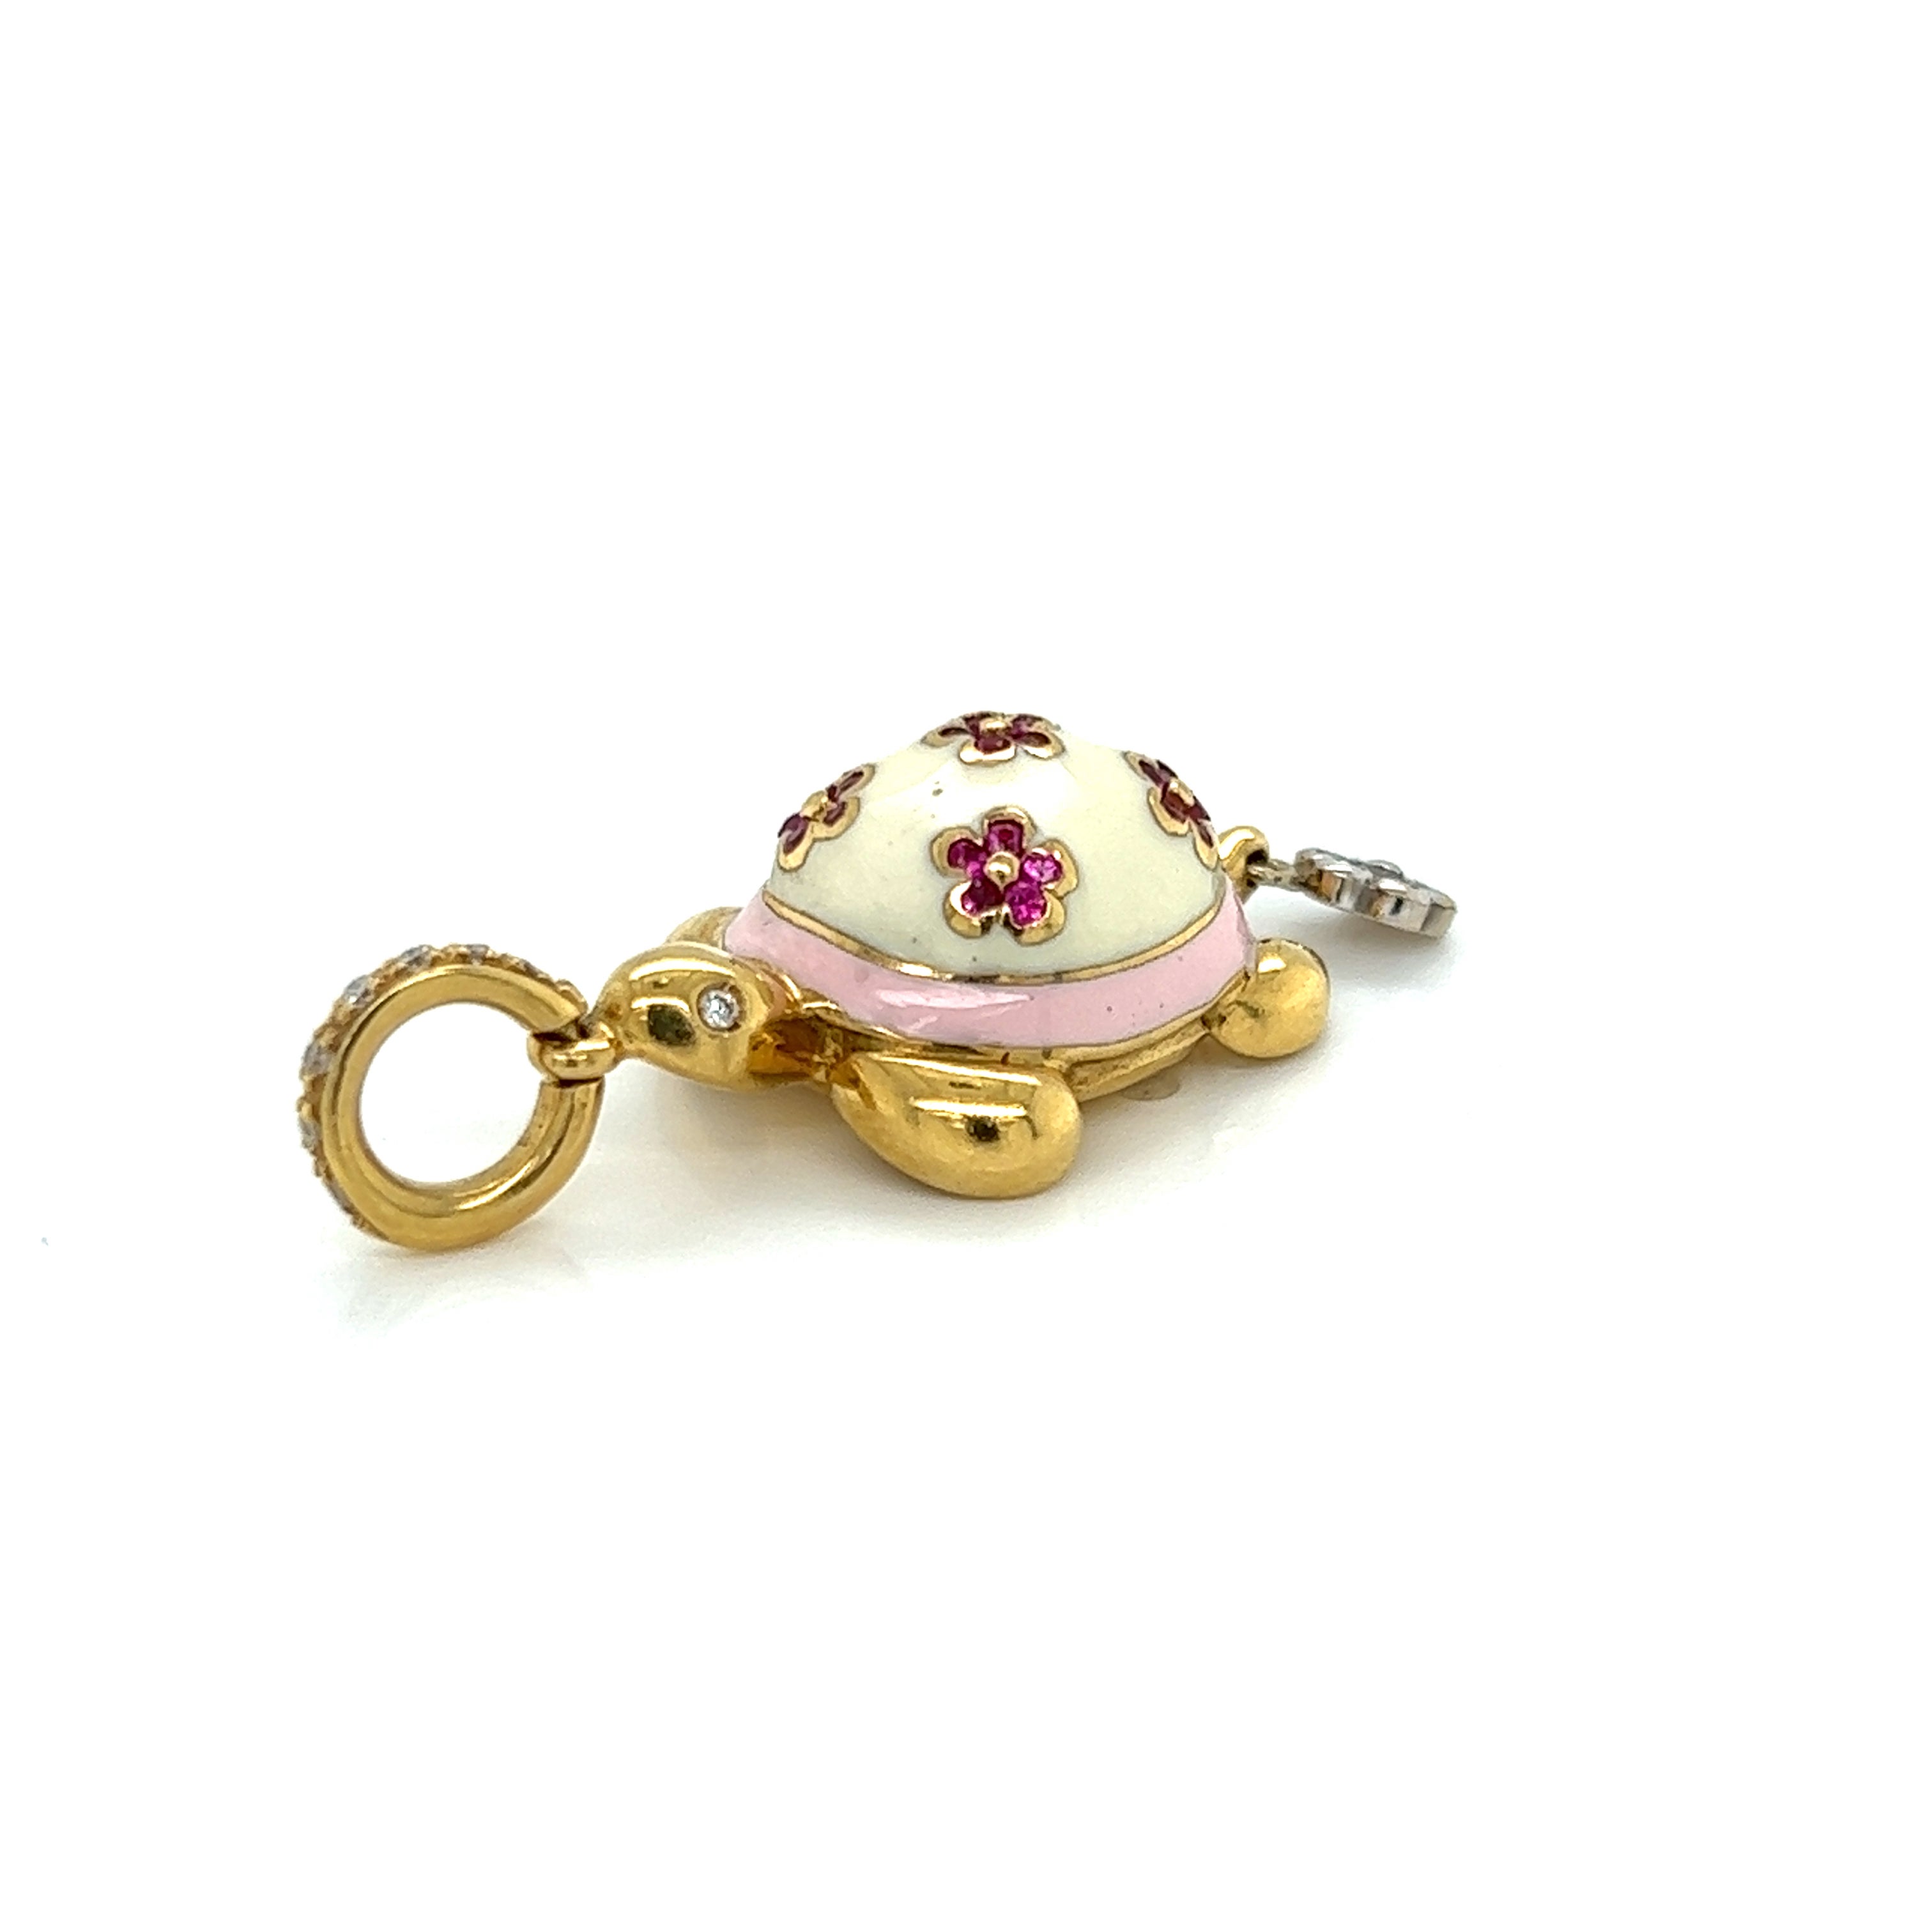 This classic adorable authentic pendant is by Aaron Basha, it is crafted from 18k yellow and white gold featuring a turtle with cream and pink enamel. Its shell is cream enamel with 5 small flowers set with pink sapphires, below the shell is pink